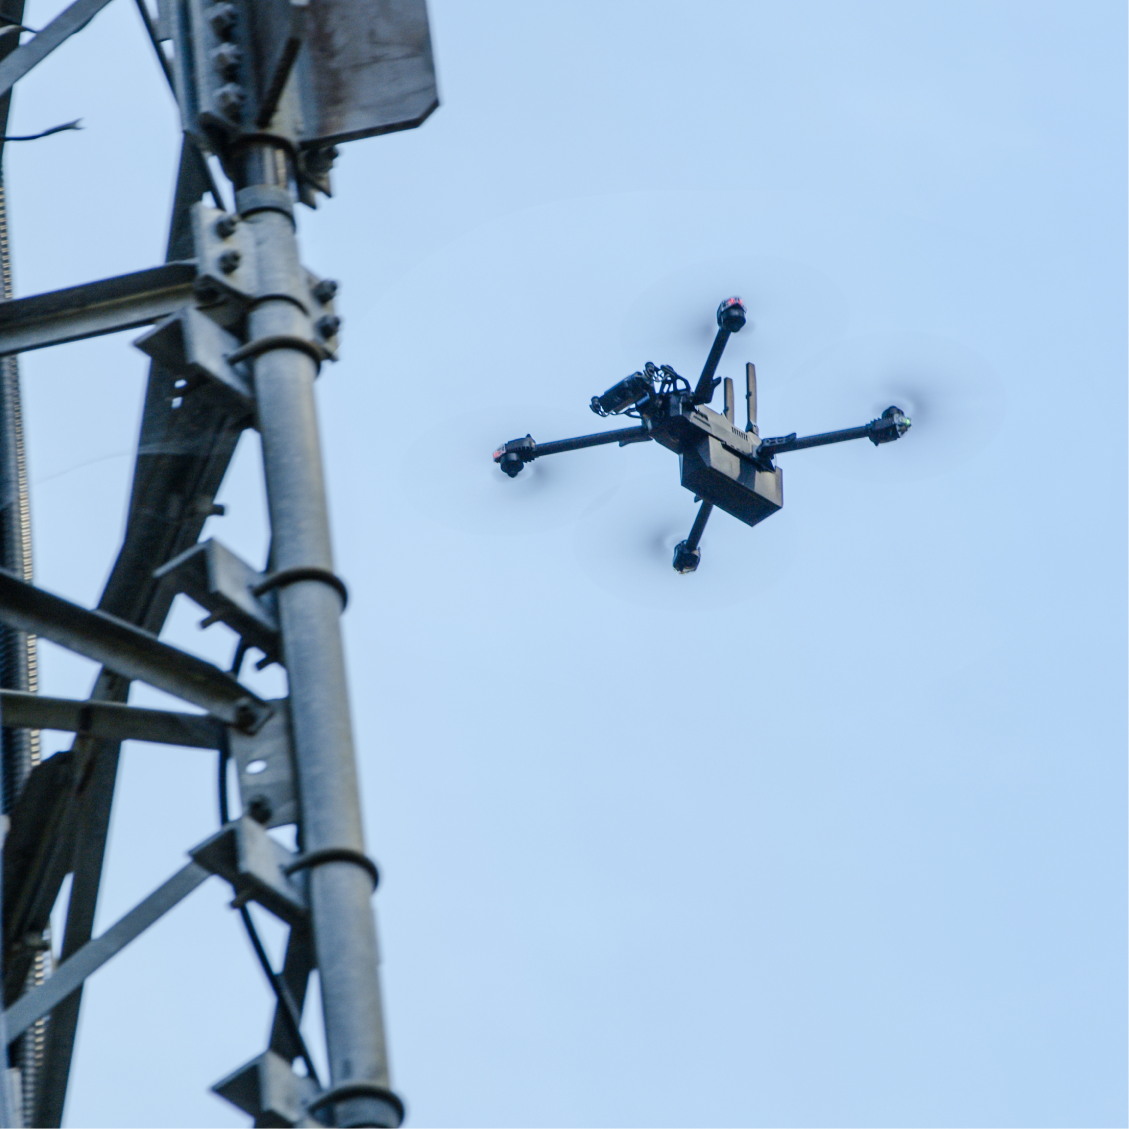 Drone in flight around cell tower inspecting telecoms equipment